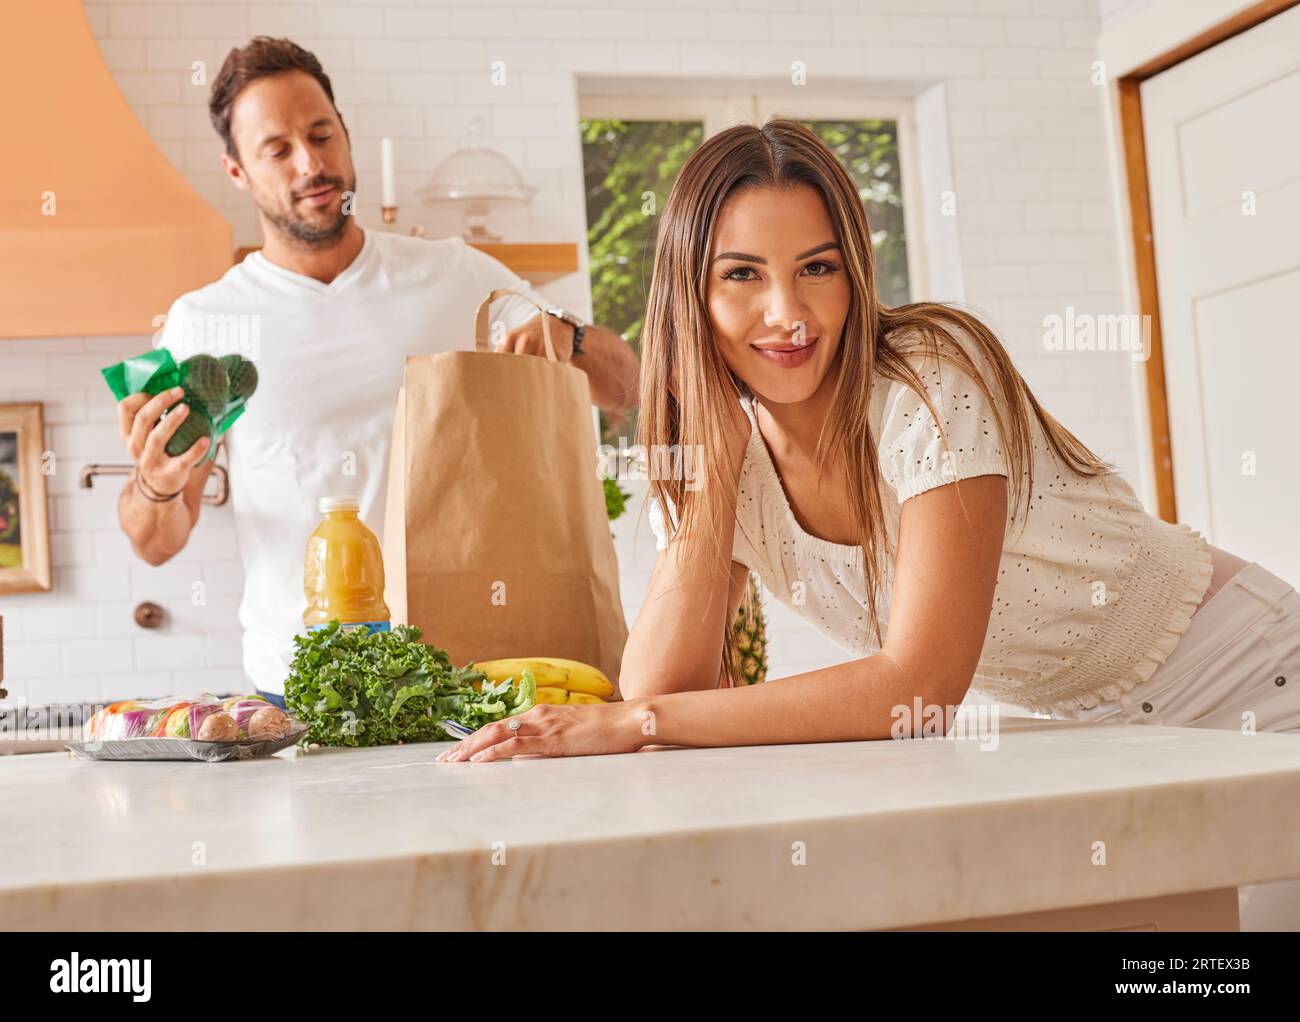 Smiling couple with paper shopping bag and groceries in kitchen Stock Photo